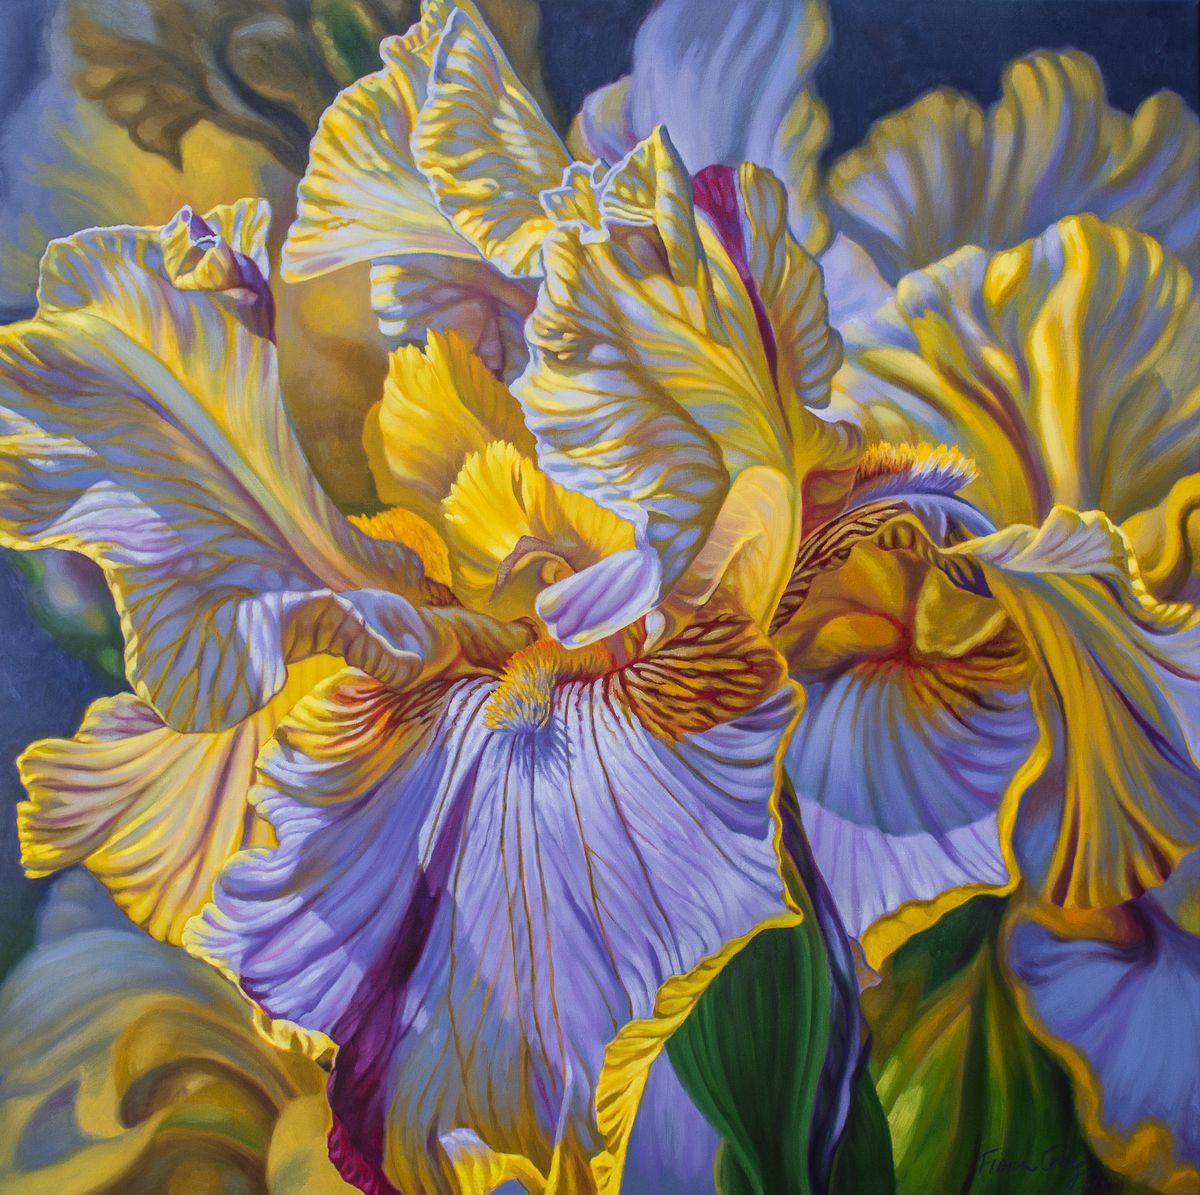 Floralscape 2: Mauve and Yellow Irises by Fiona Craig